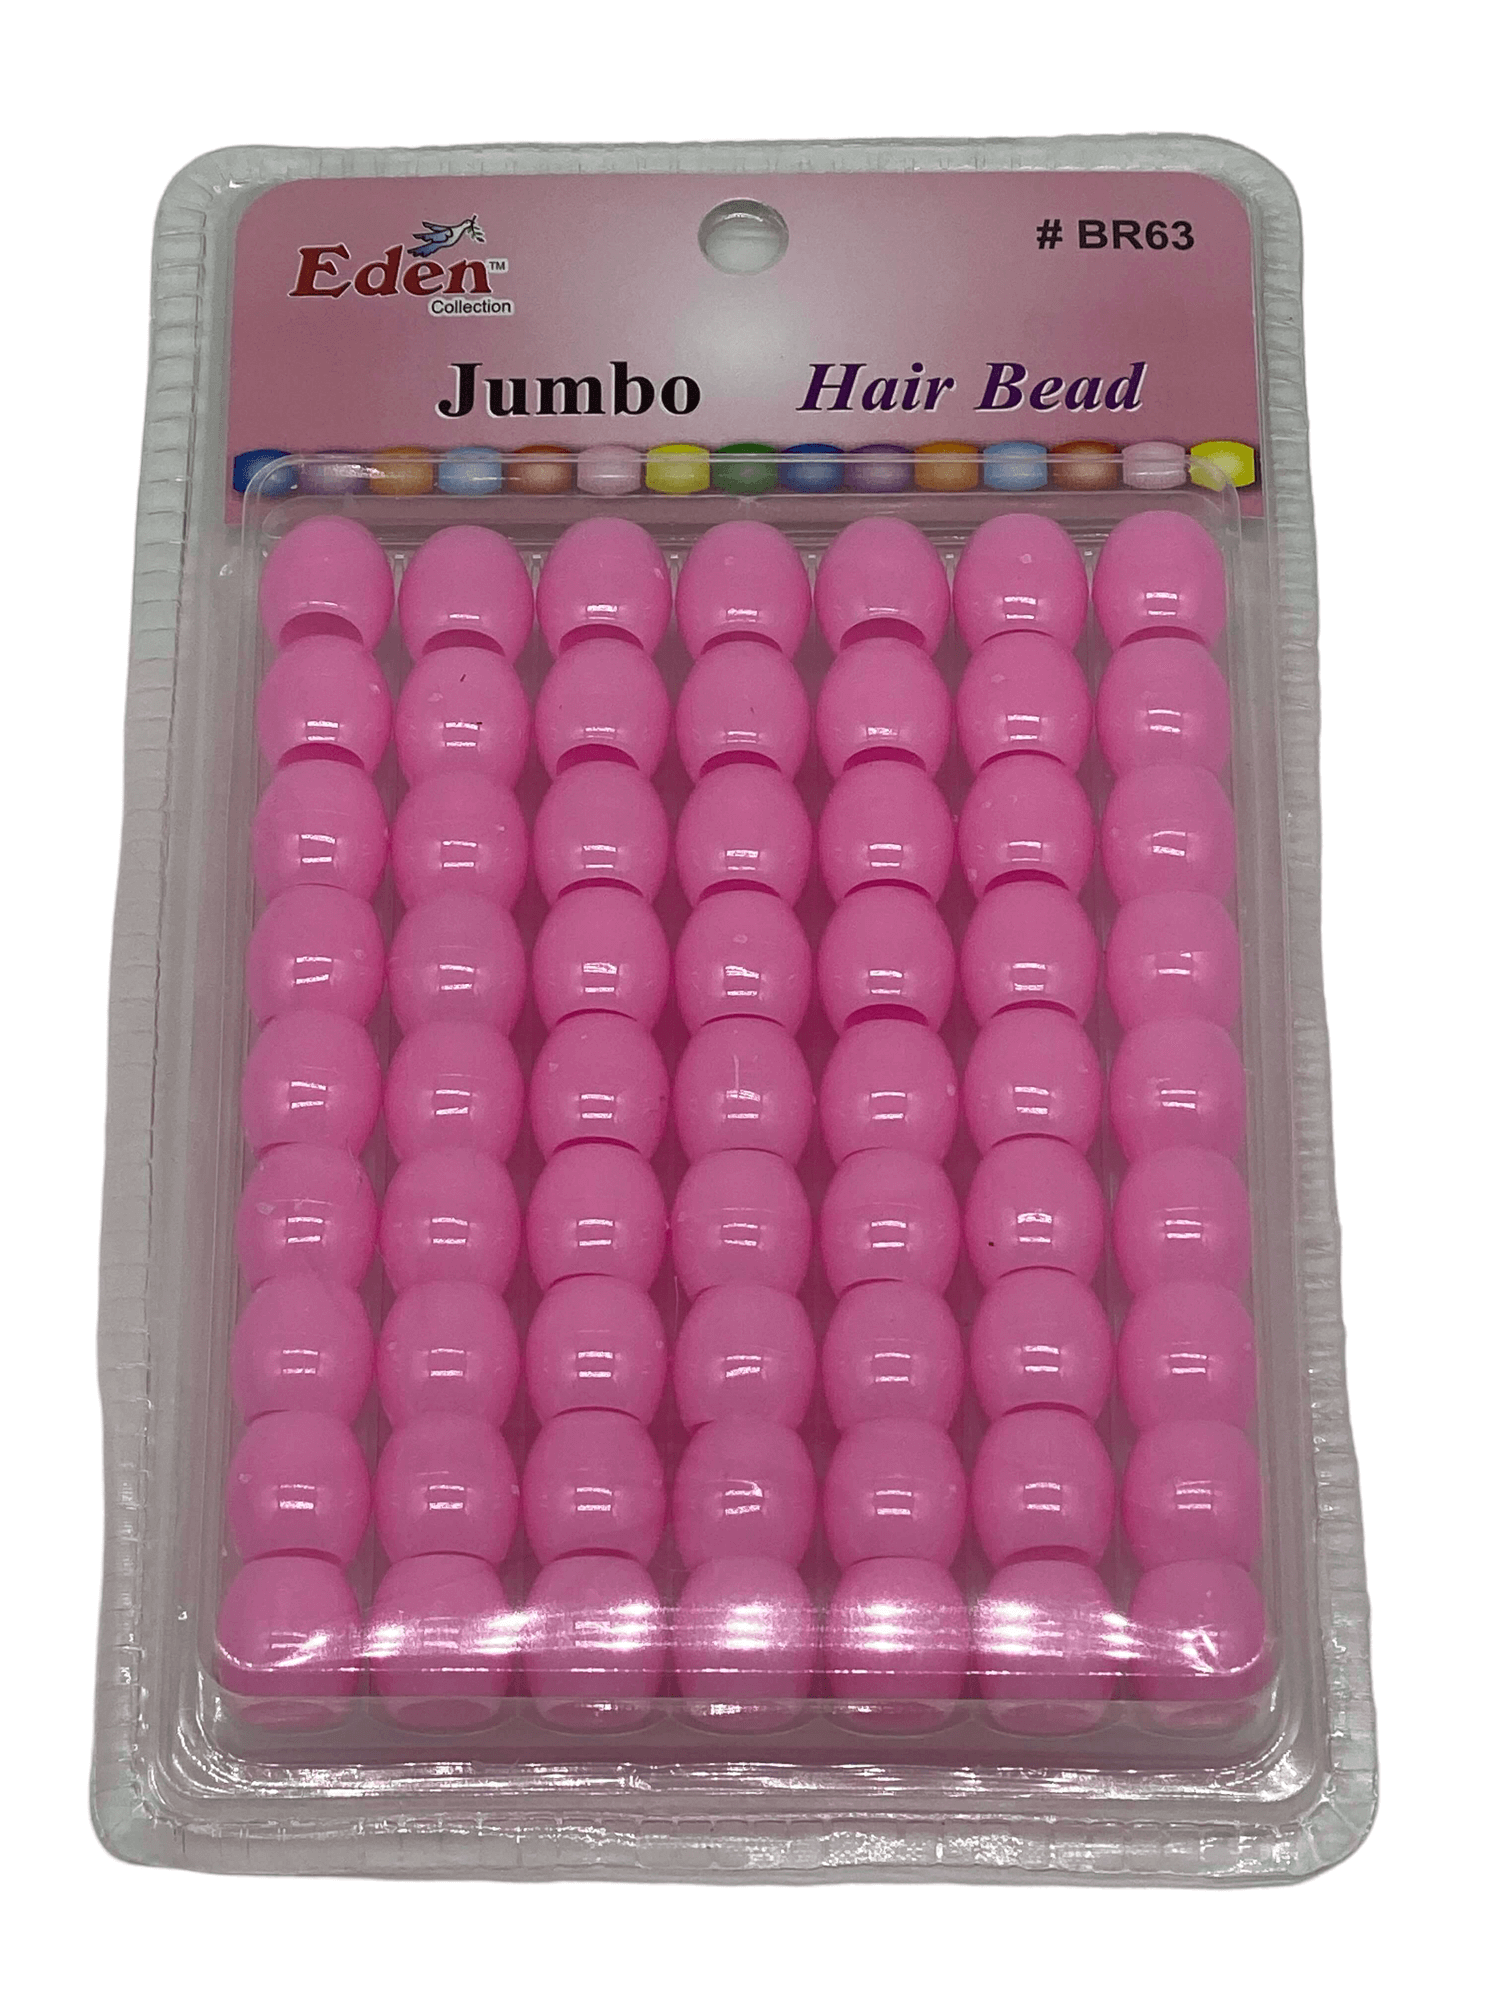 Bello Collection Jumbo Hair Beads-Clear/Gold #39900G